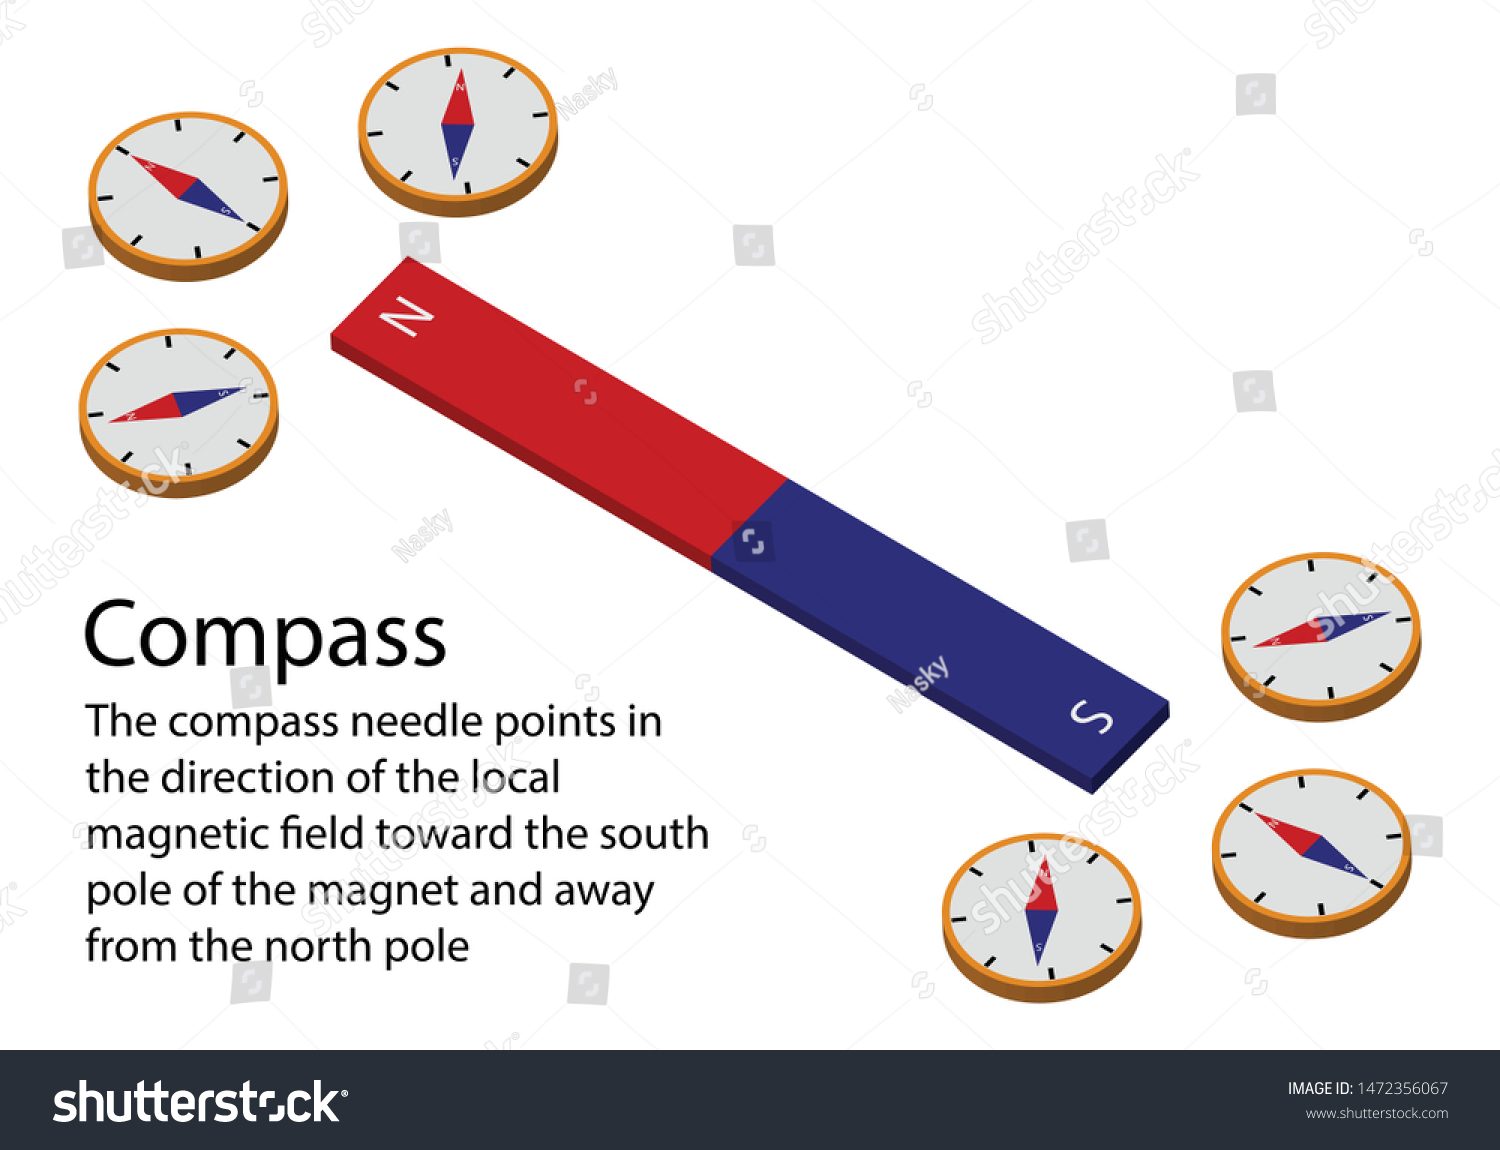 where does a compass needle point